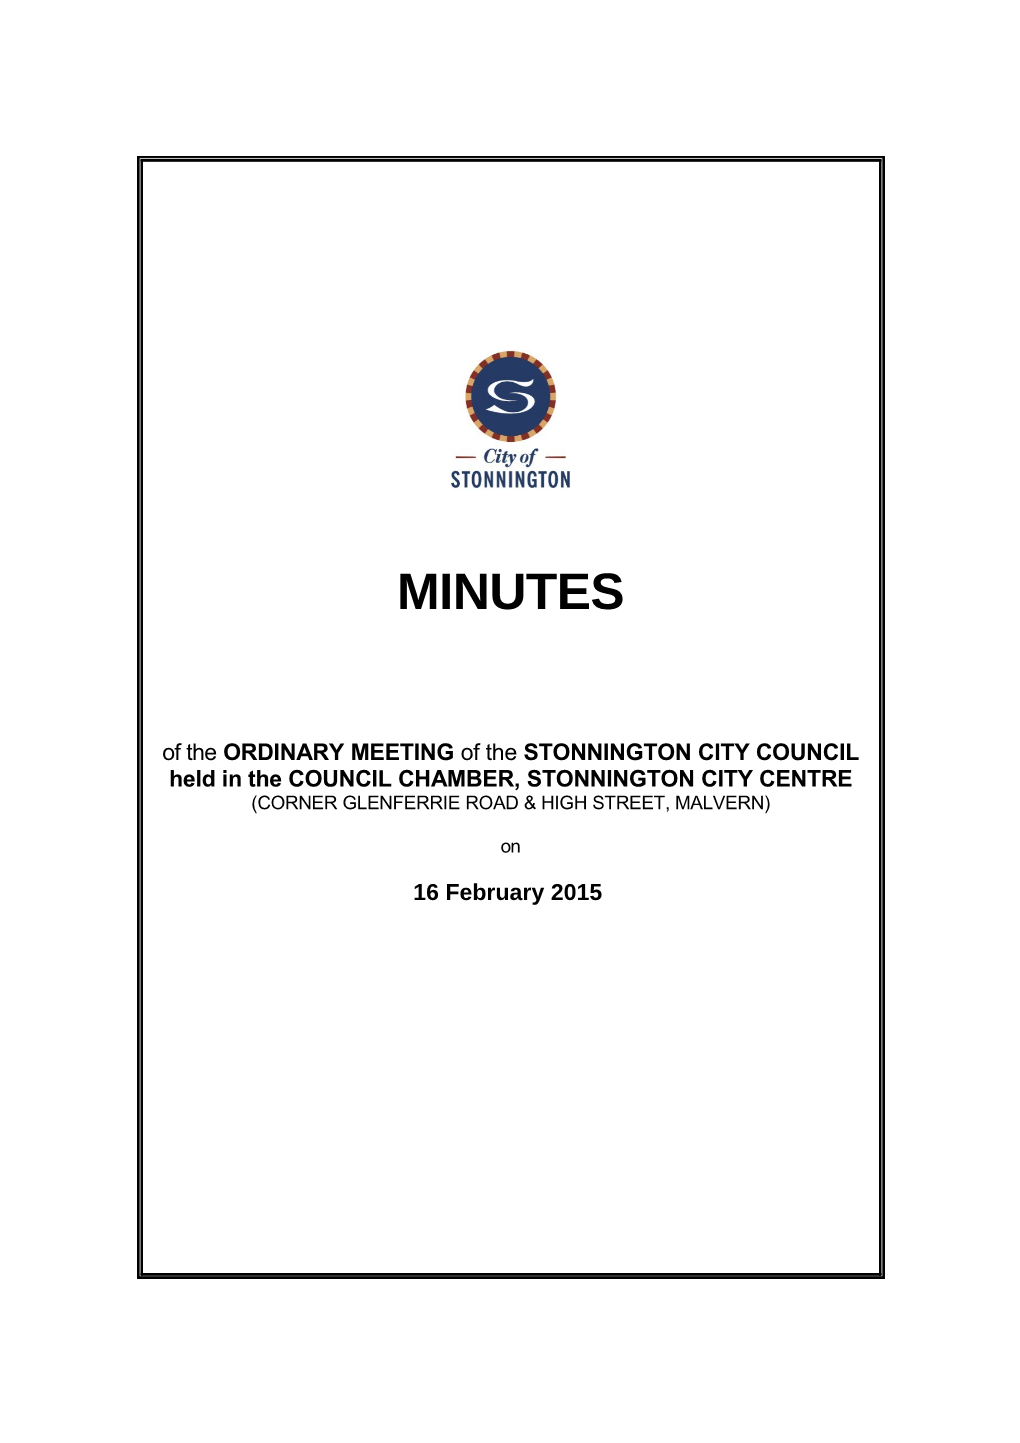 Minutes of Council Meeting - 16 February 2015